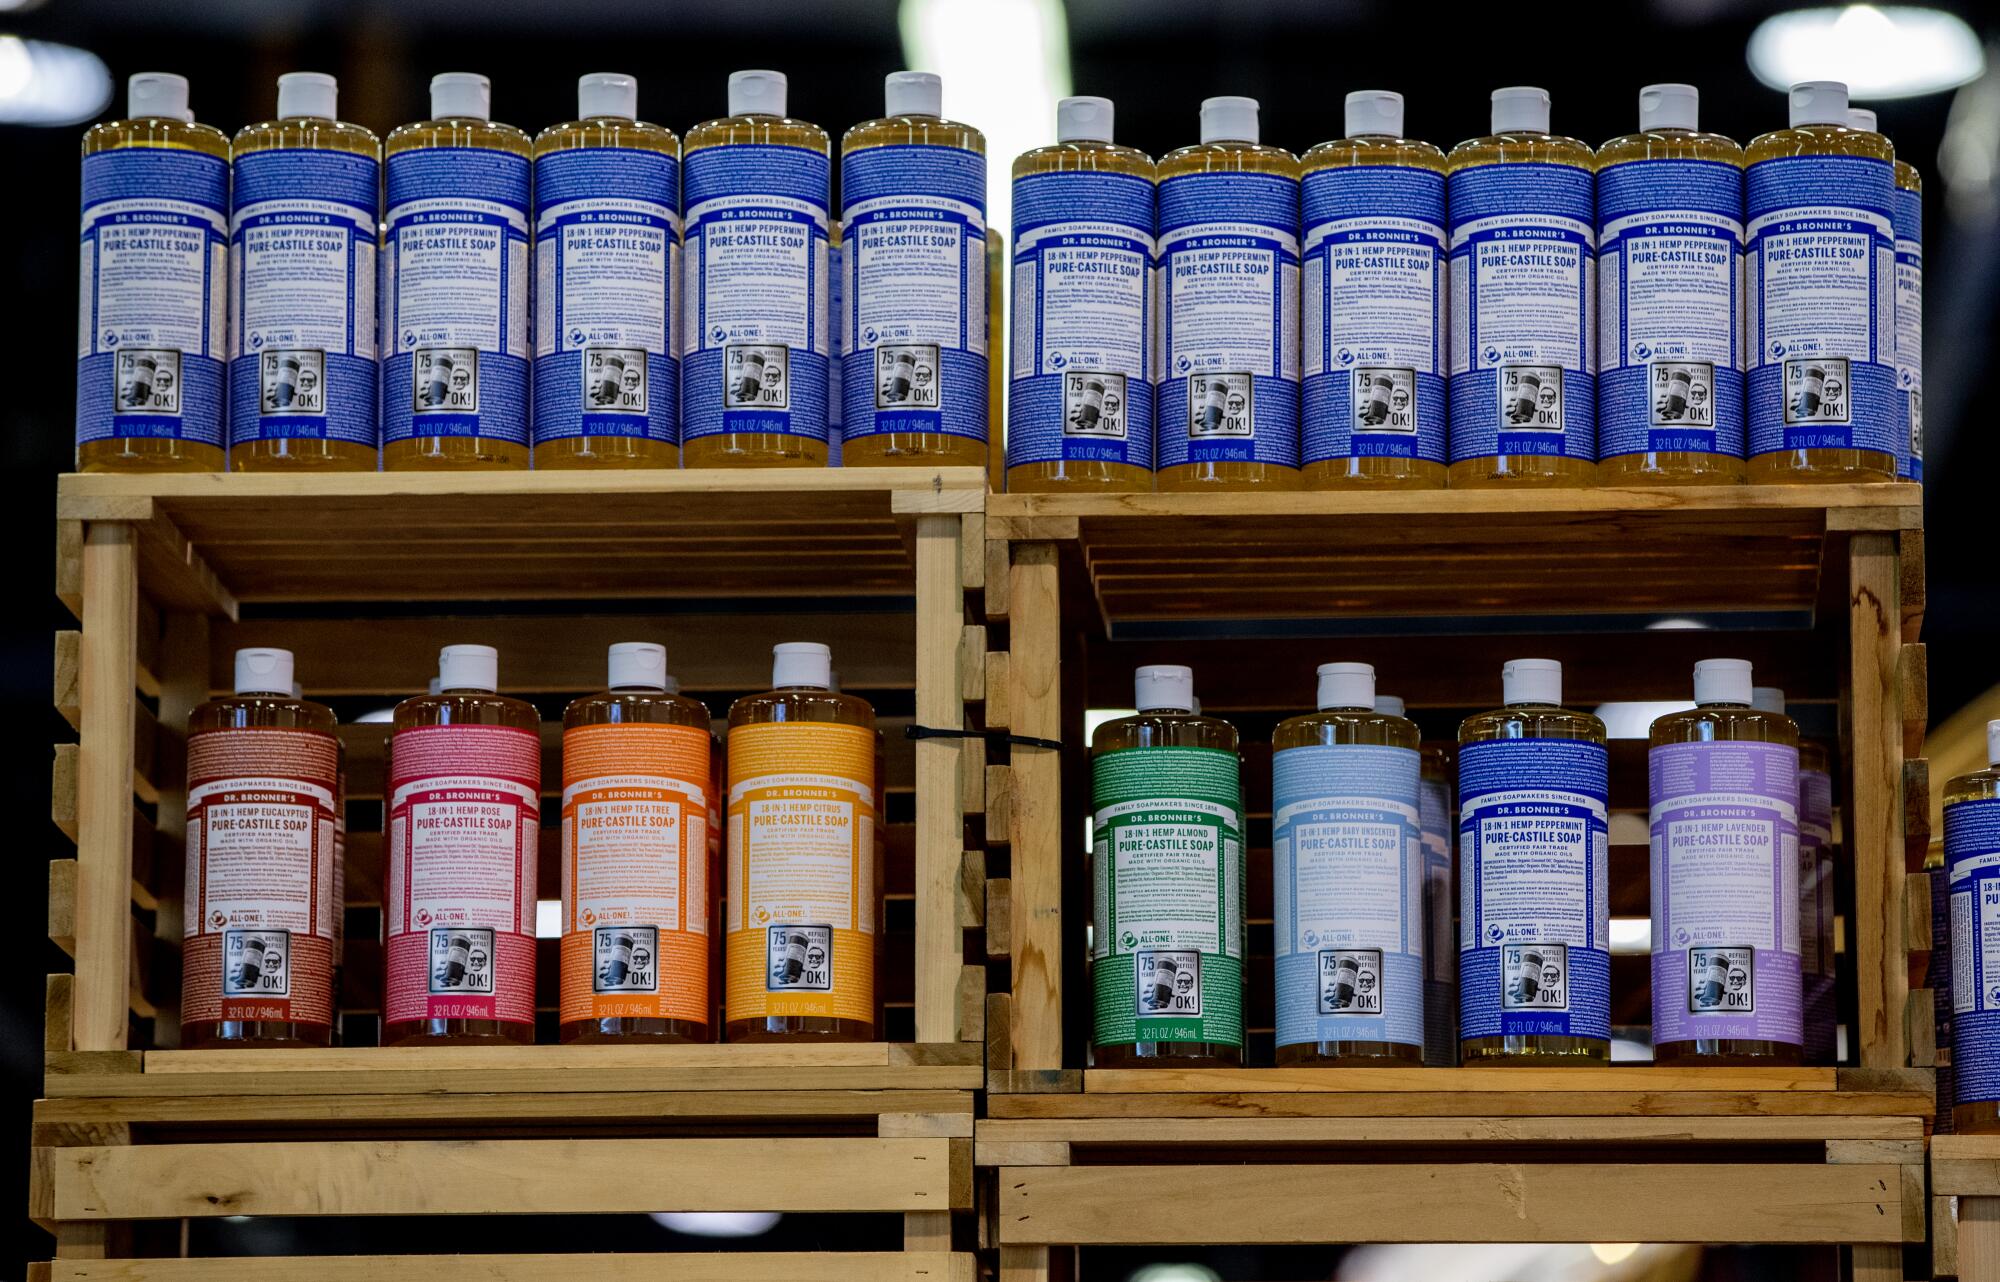 Bottles of liquid soap in multiple colors lined up on rugged shelves